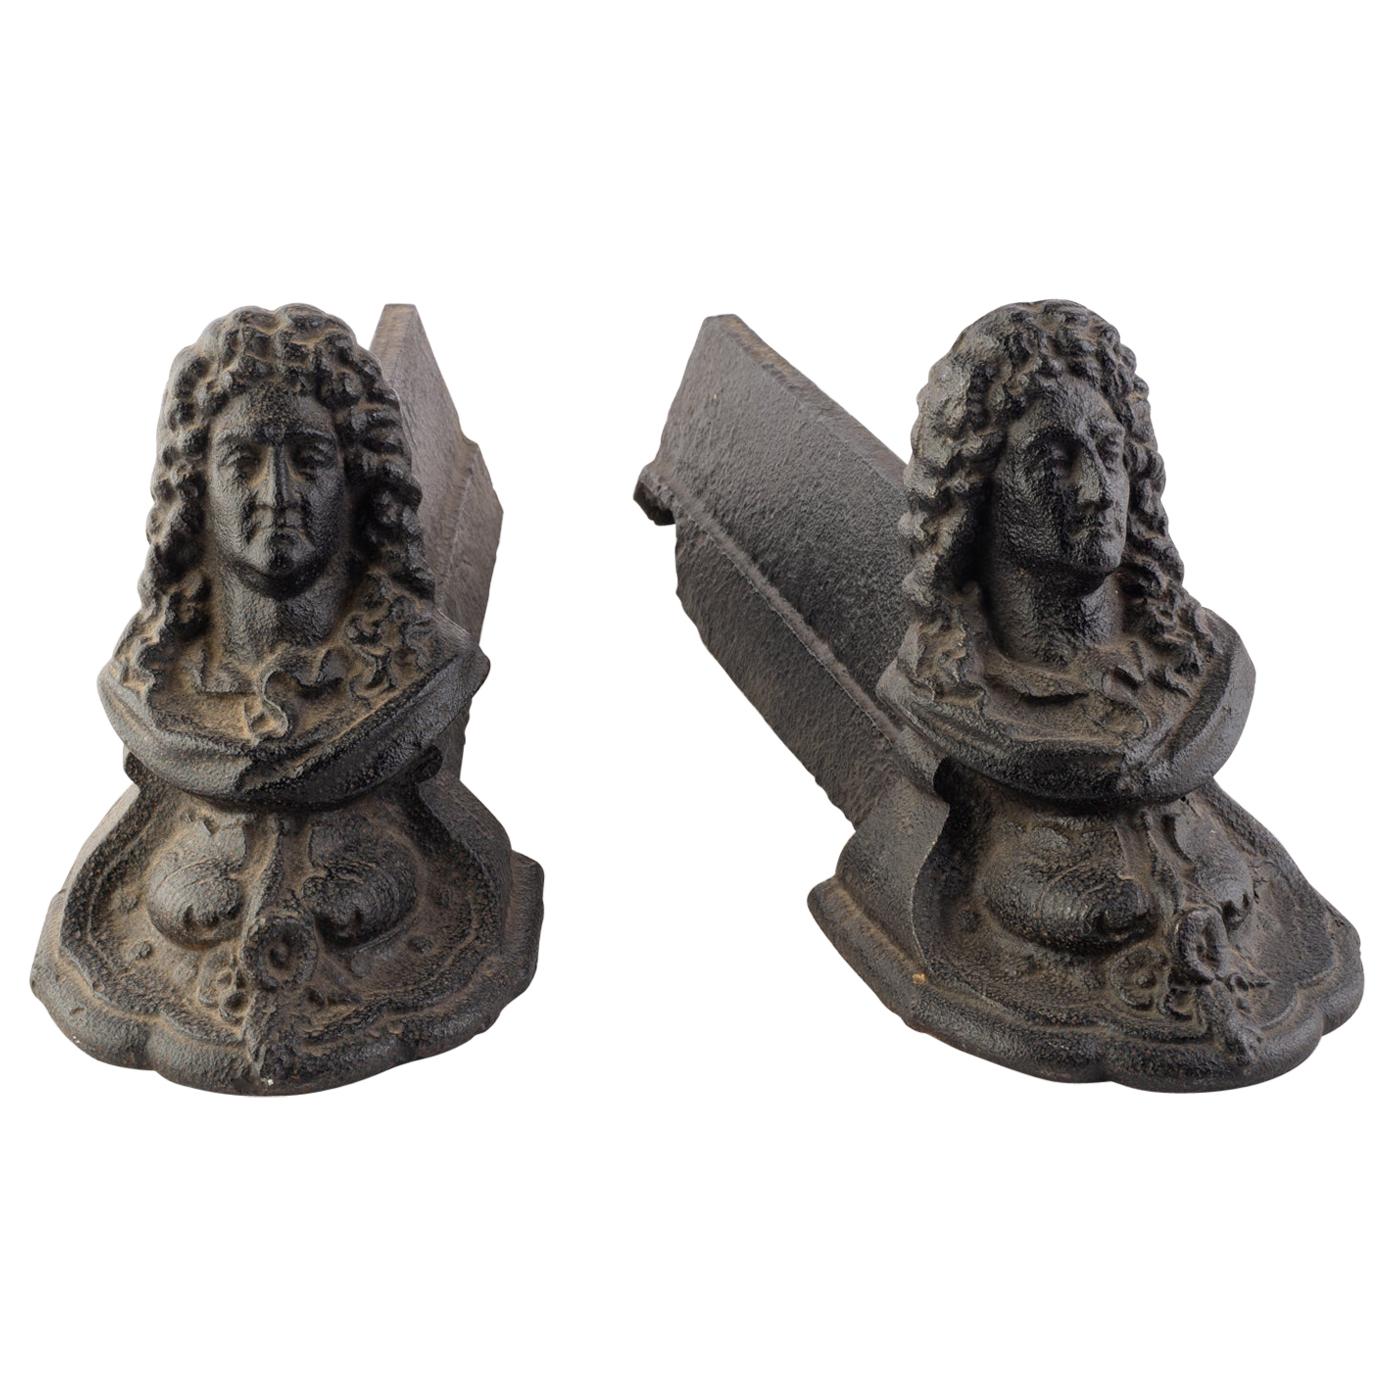 Fireplace Andirons: Noble with Wig